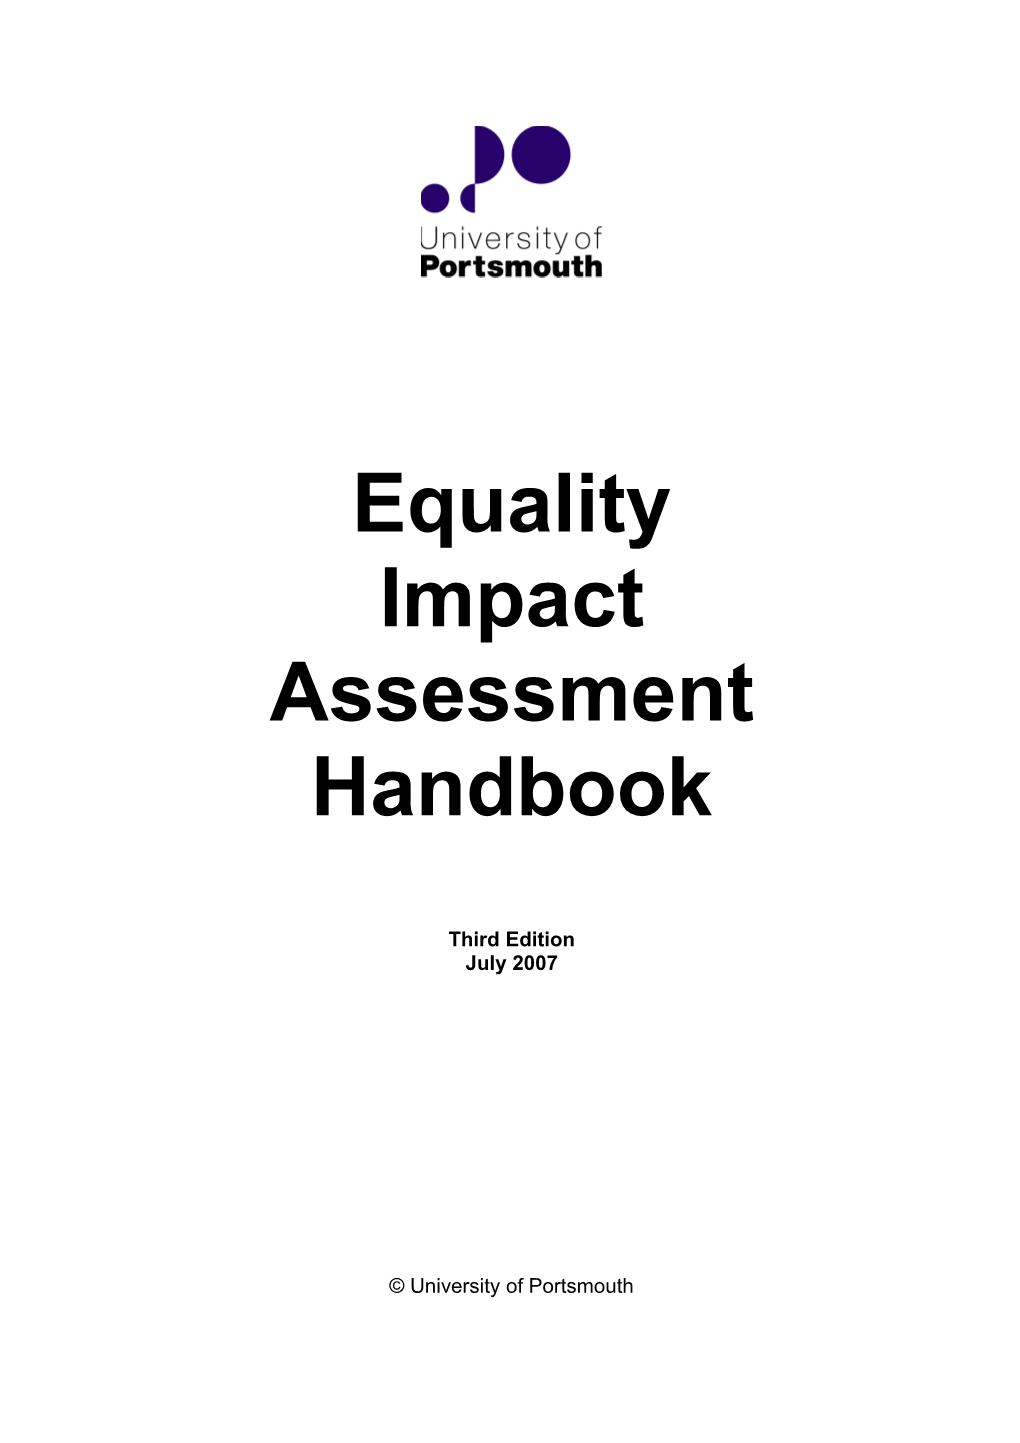 We All Do Impact Assessments Every Day